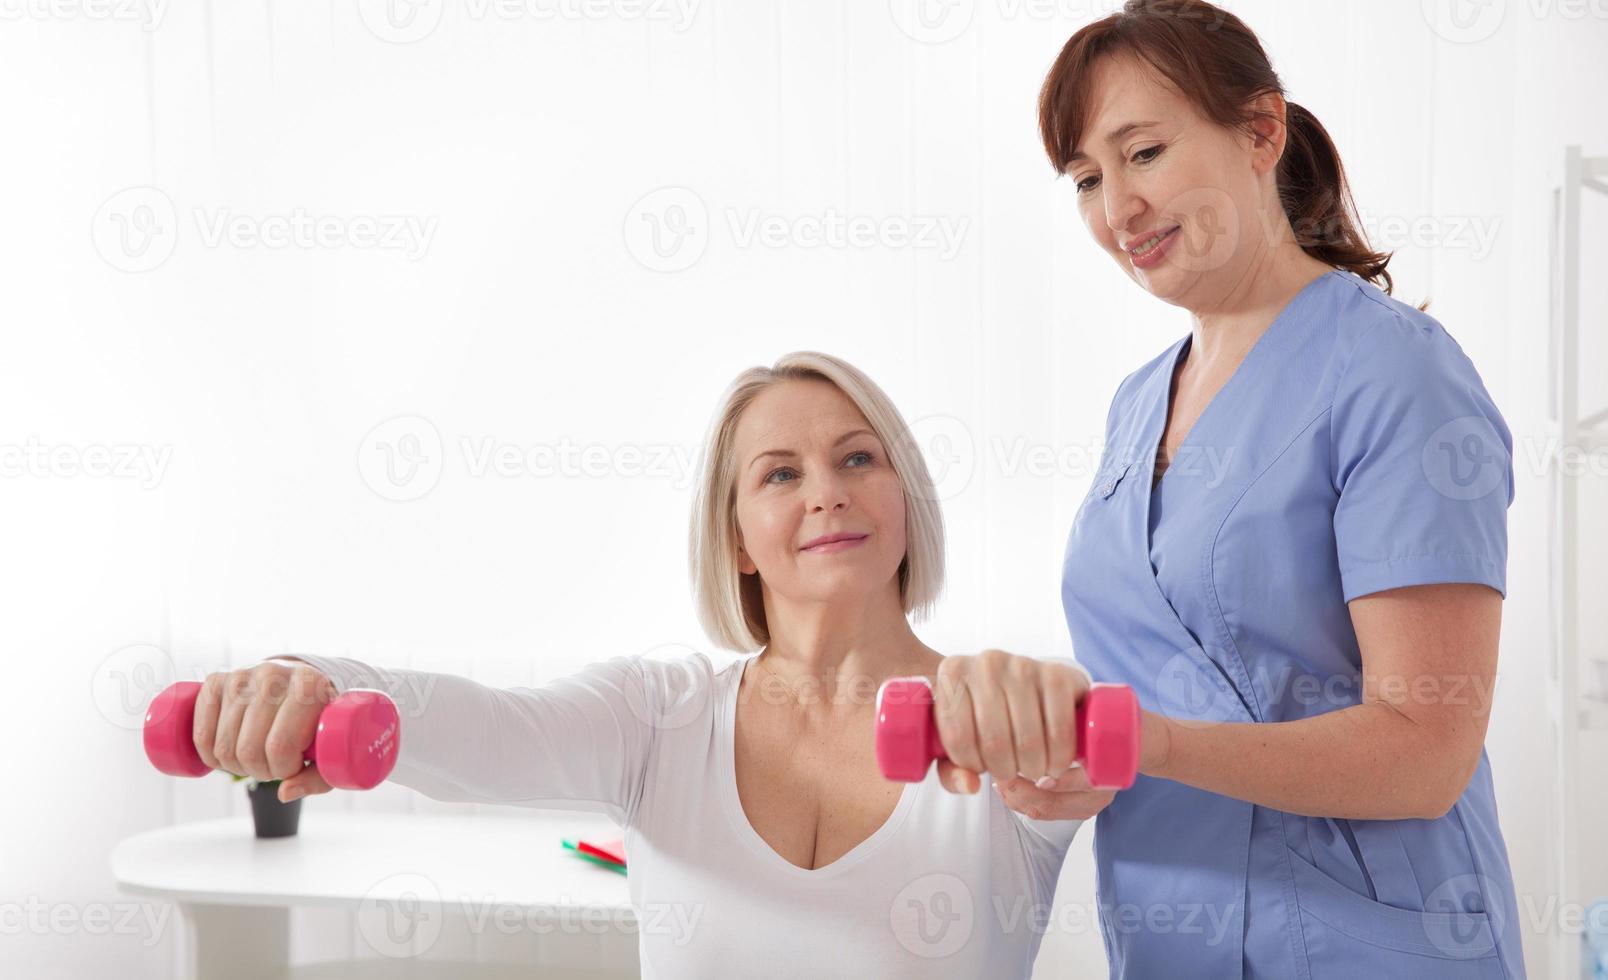 A physiotherapist helps an older woman recover from an injury through exercise with dumbbells. photo